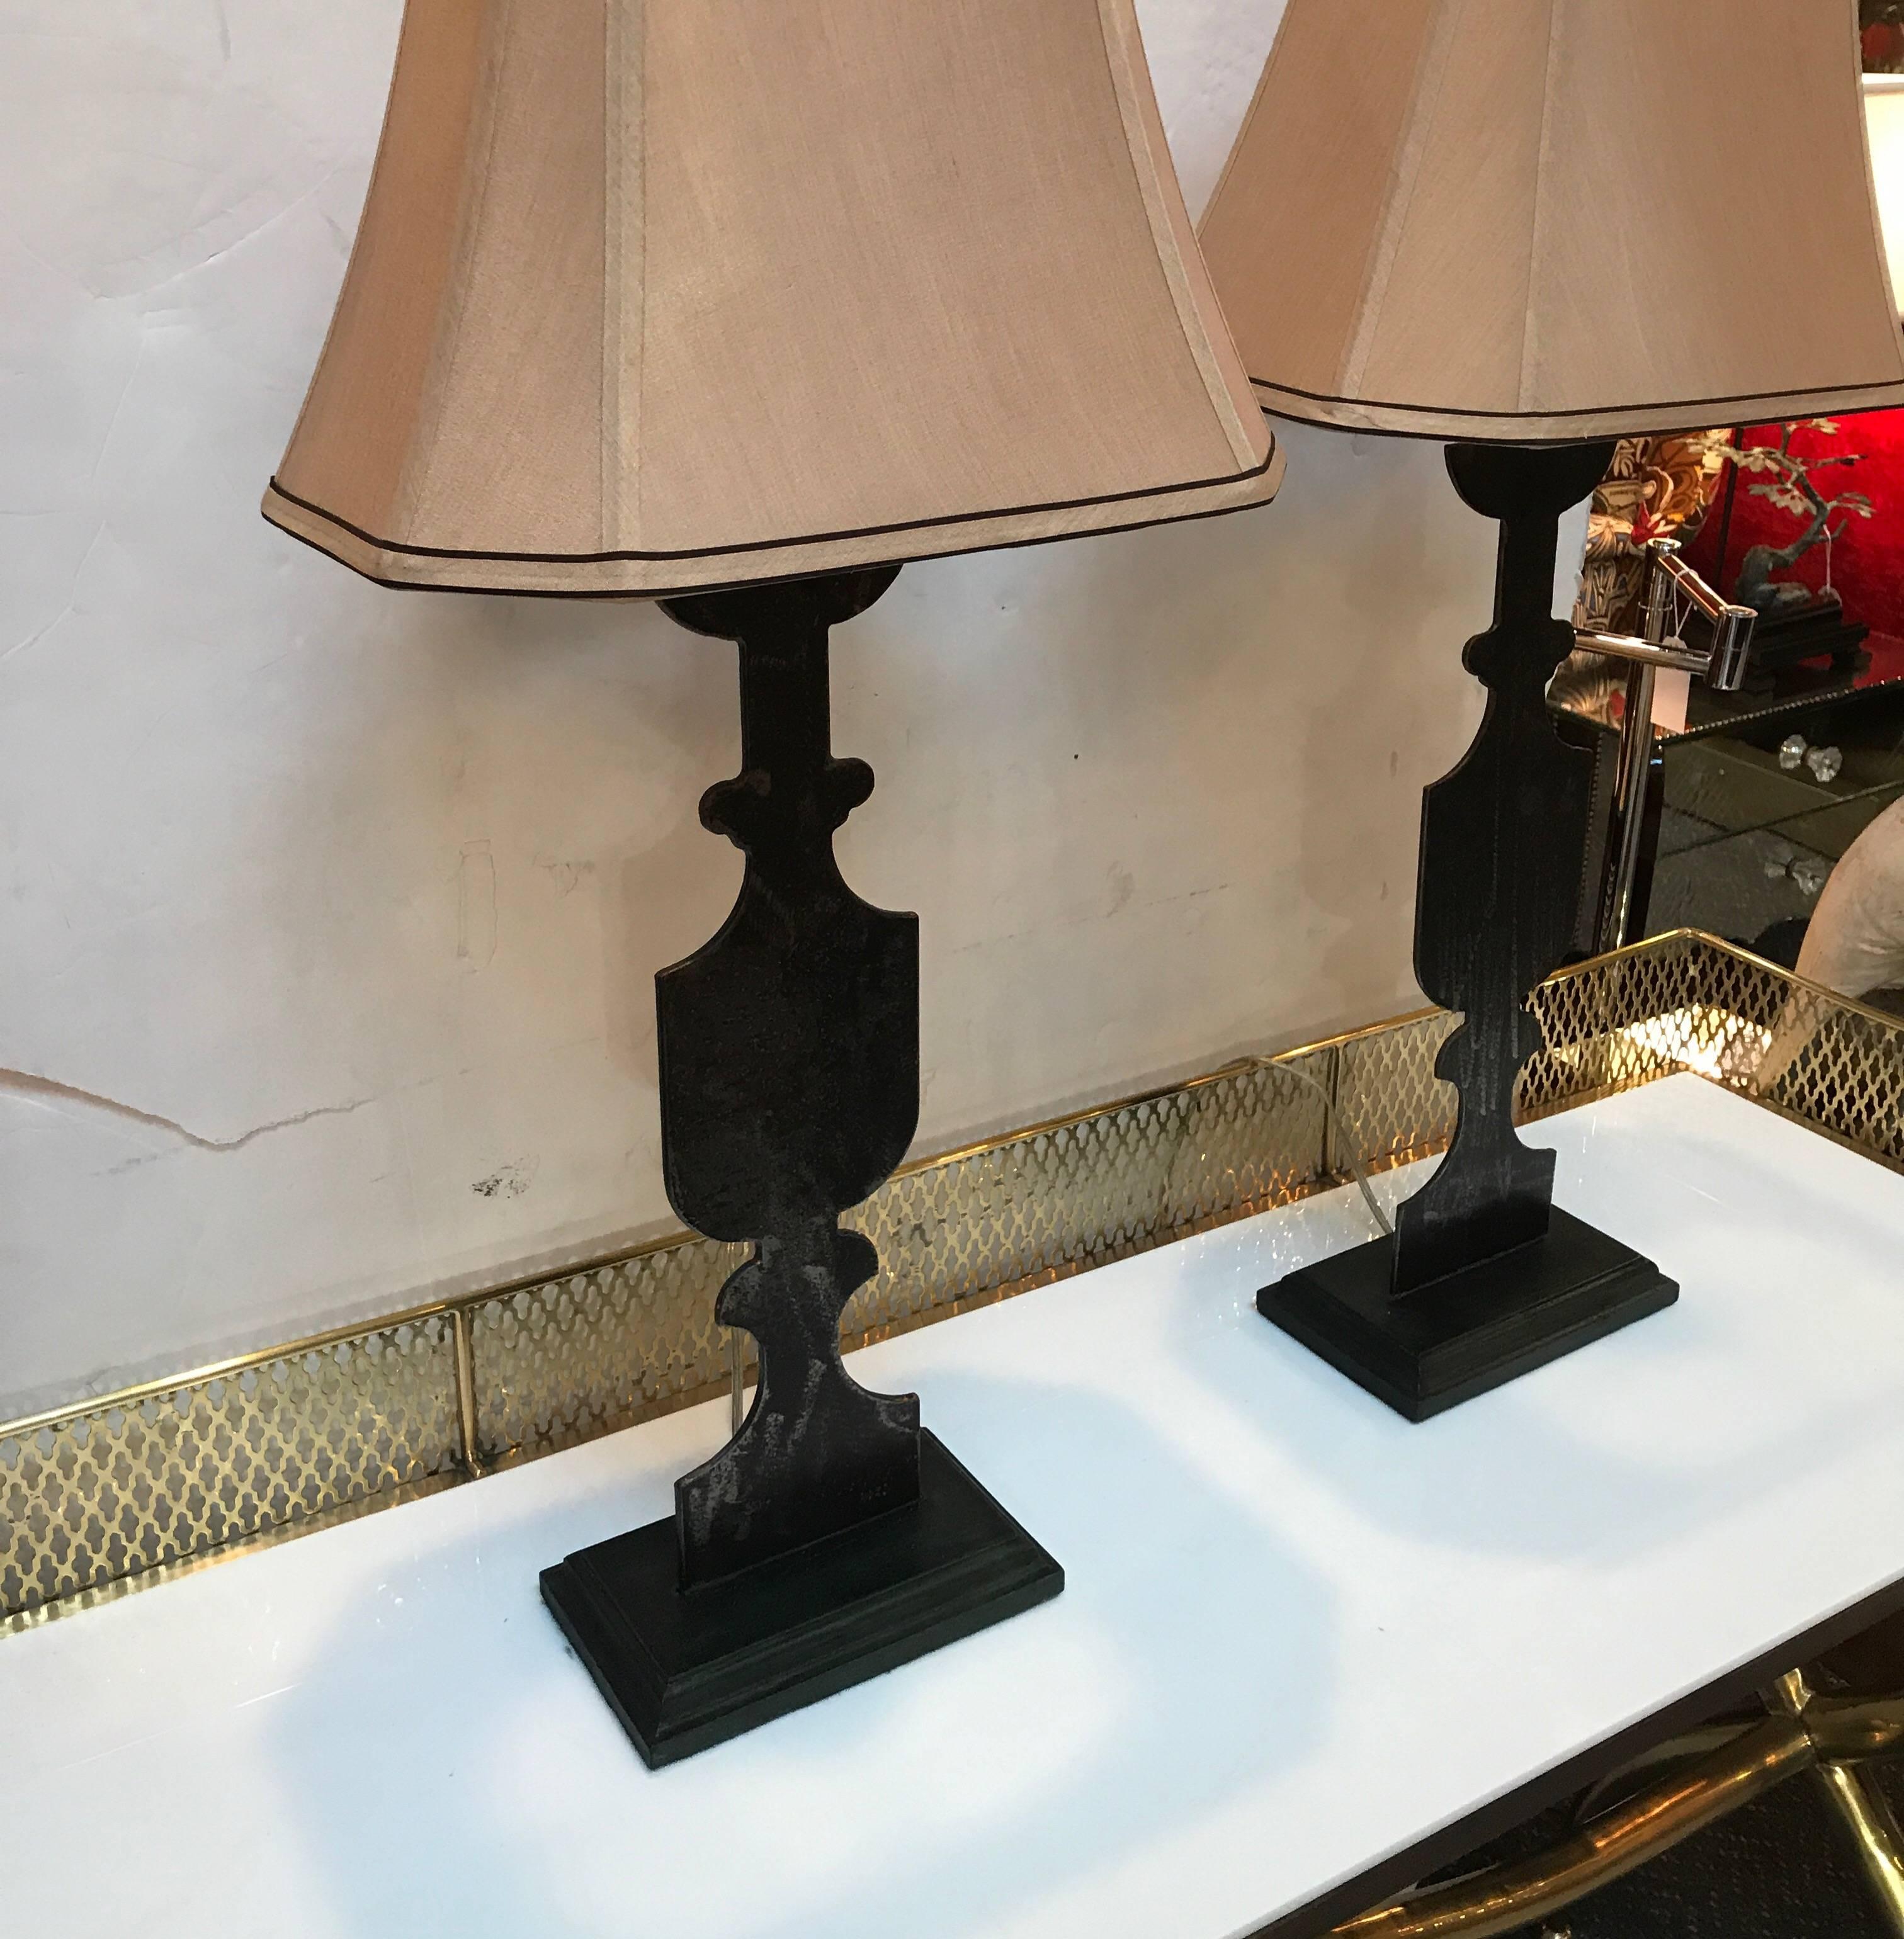 A pair of Industrial style Urn lams with square bases. The flat cut steel urns with painted to match wood bases. A two dimensional version of urns with an aged dark patinated finish. Topped is French Empire bell shades with black trim.